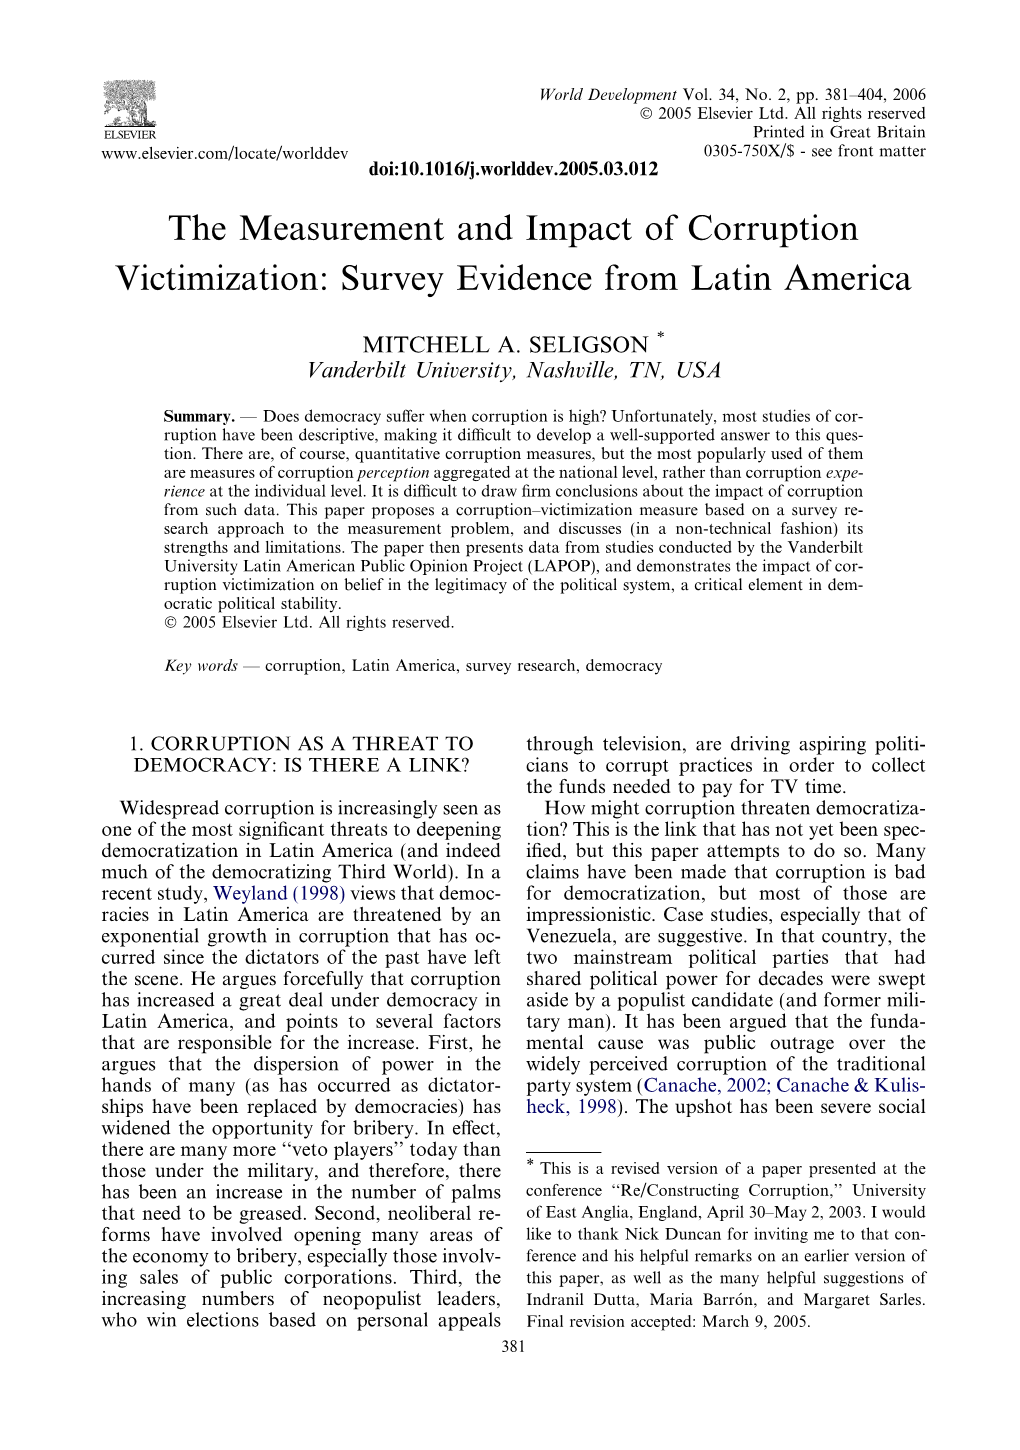 The Measurement and Impact of Corruption Victimization: Survey Evidence from Latin America